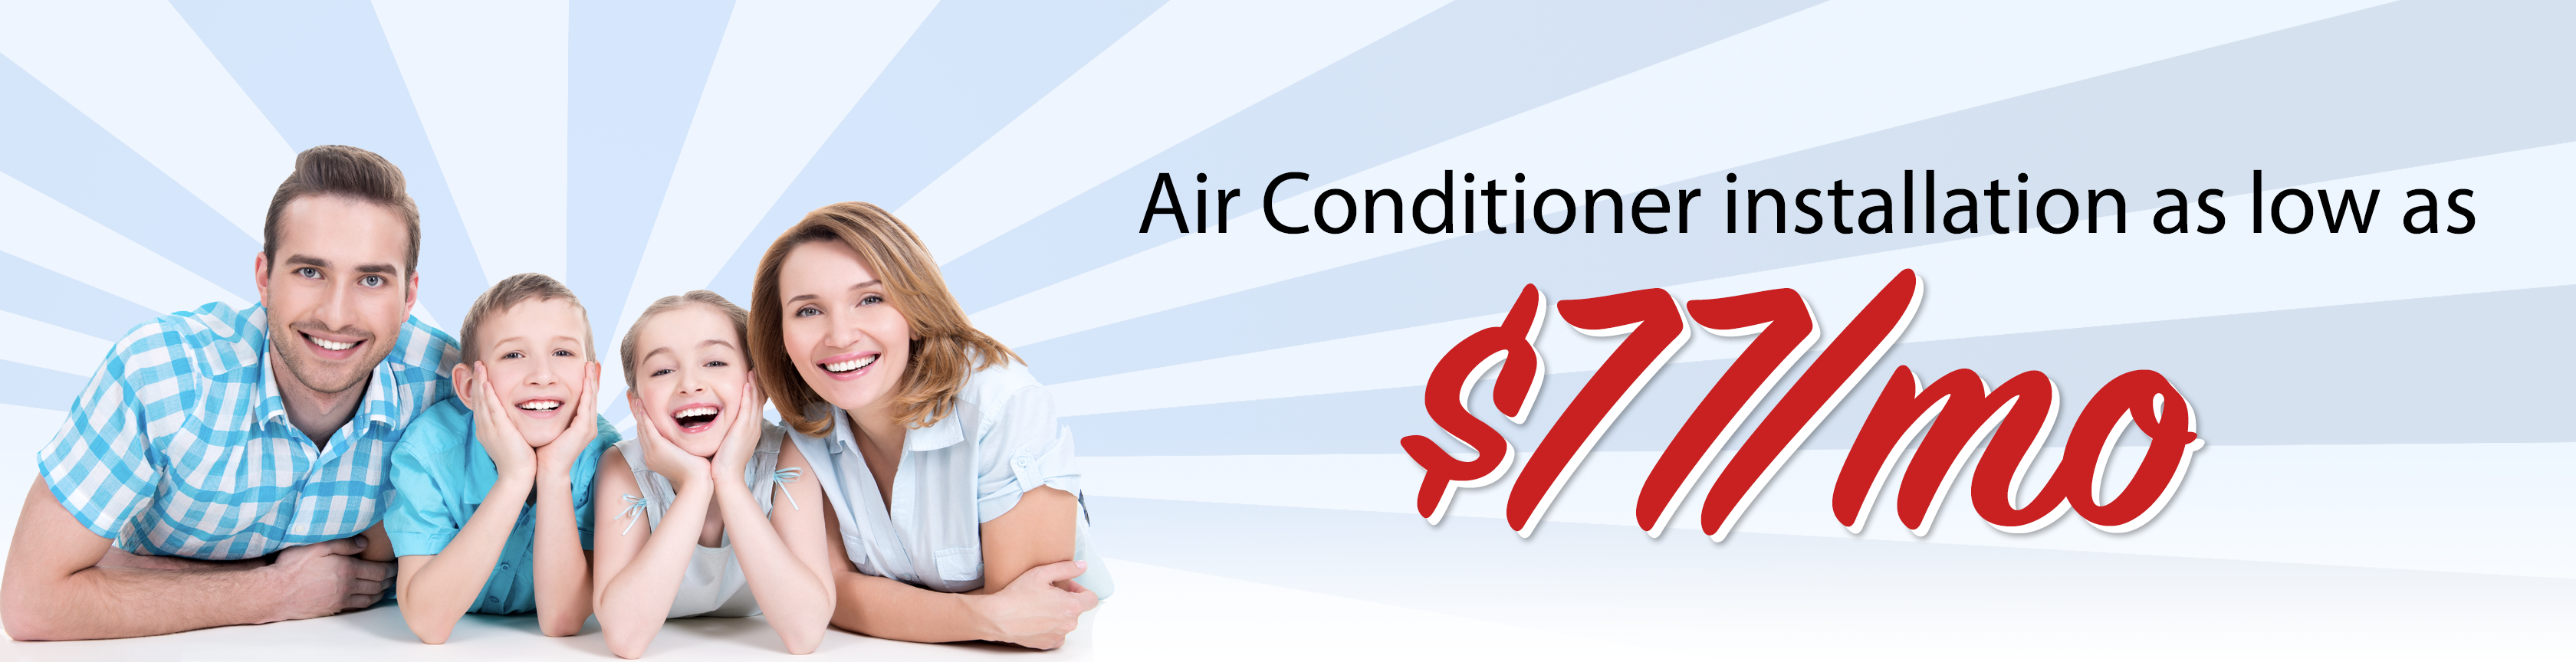 Air Conditioner Installation as low as $77/mo